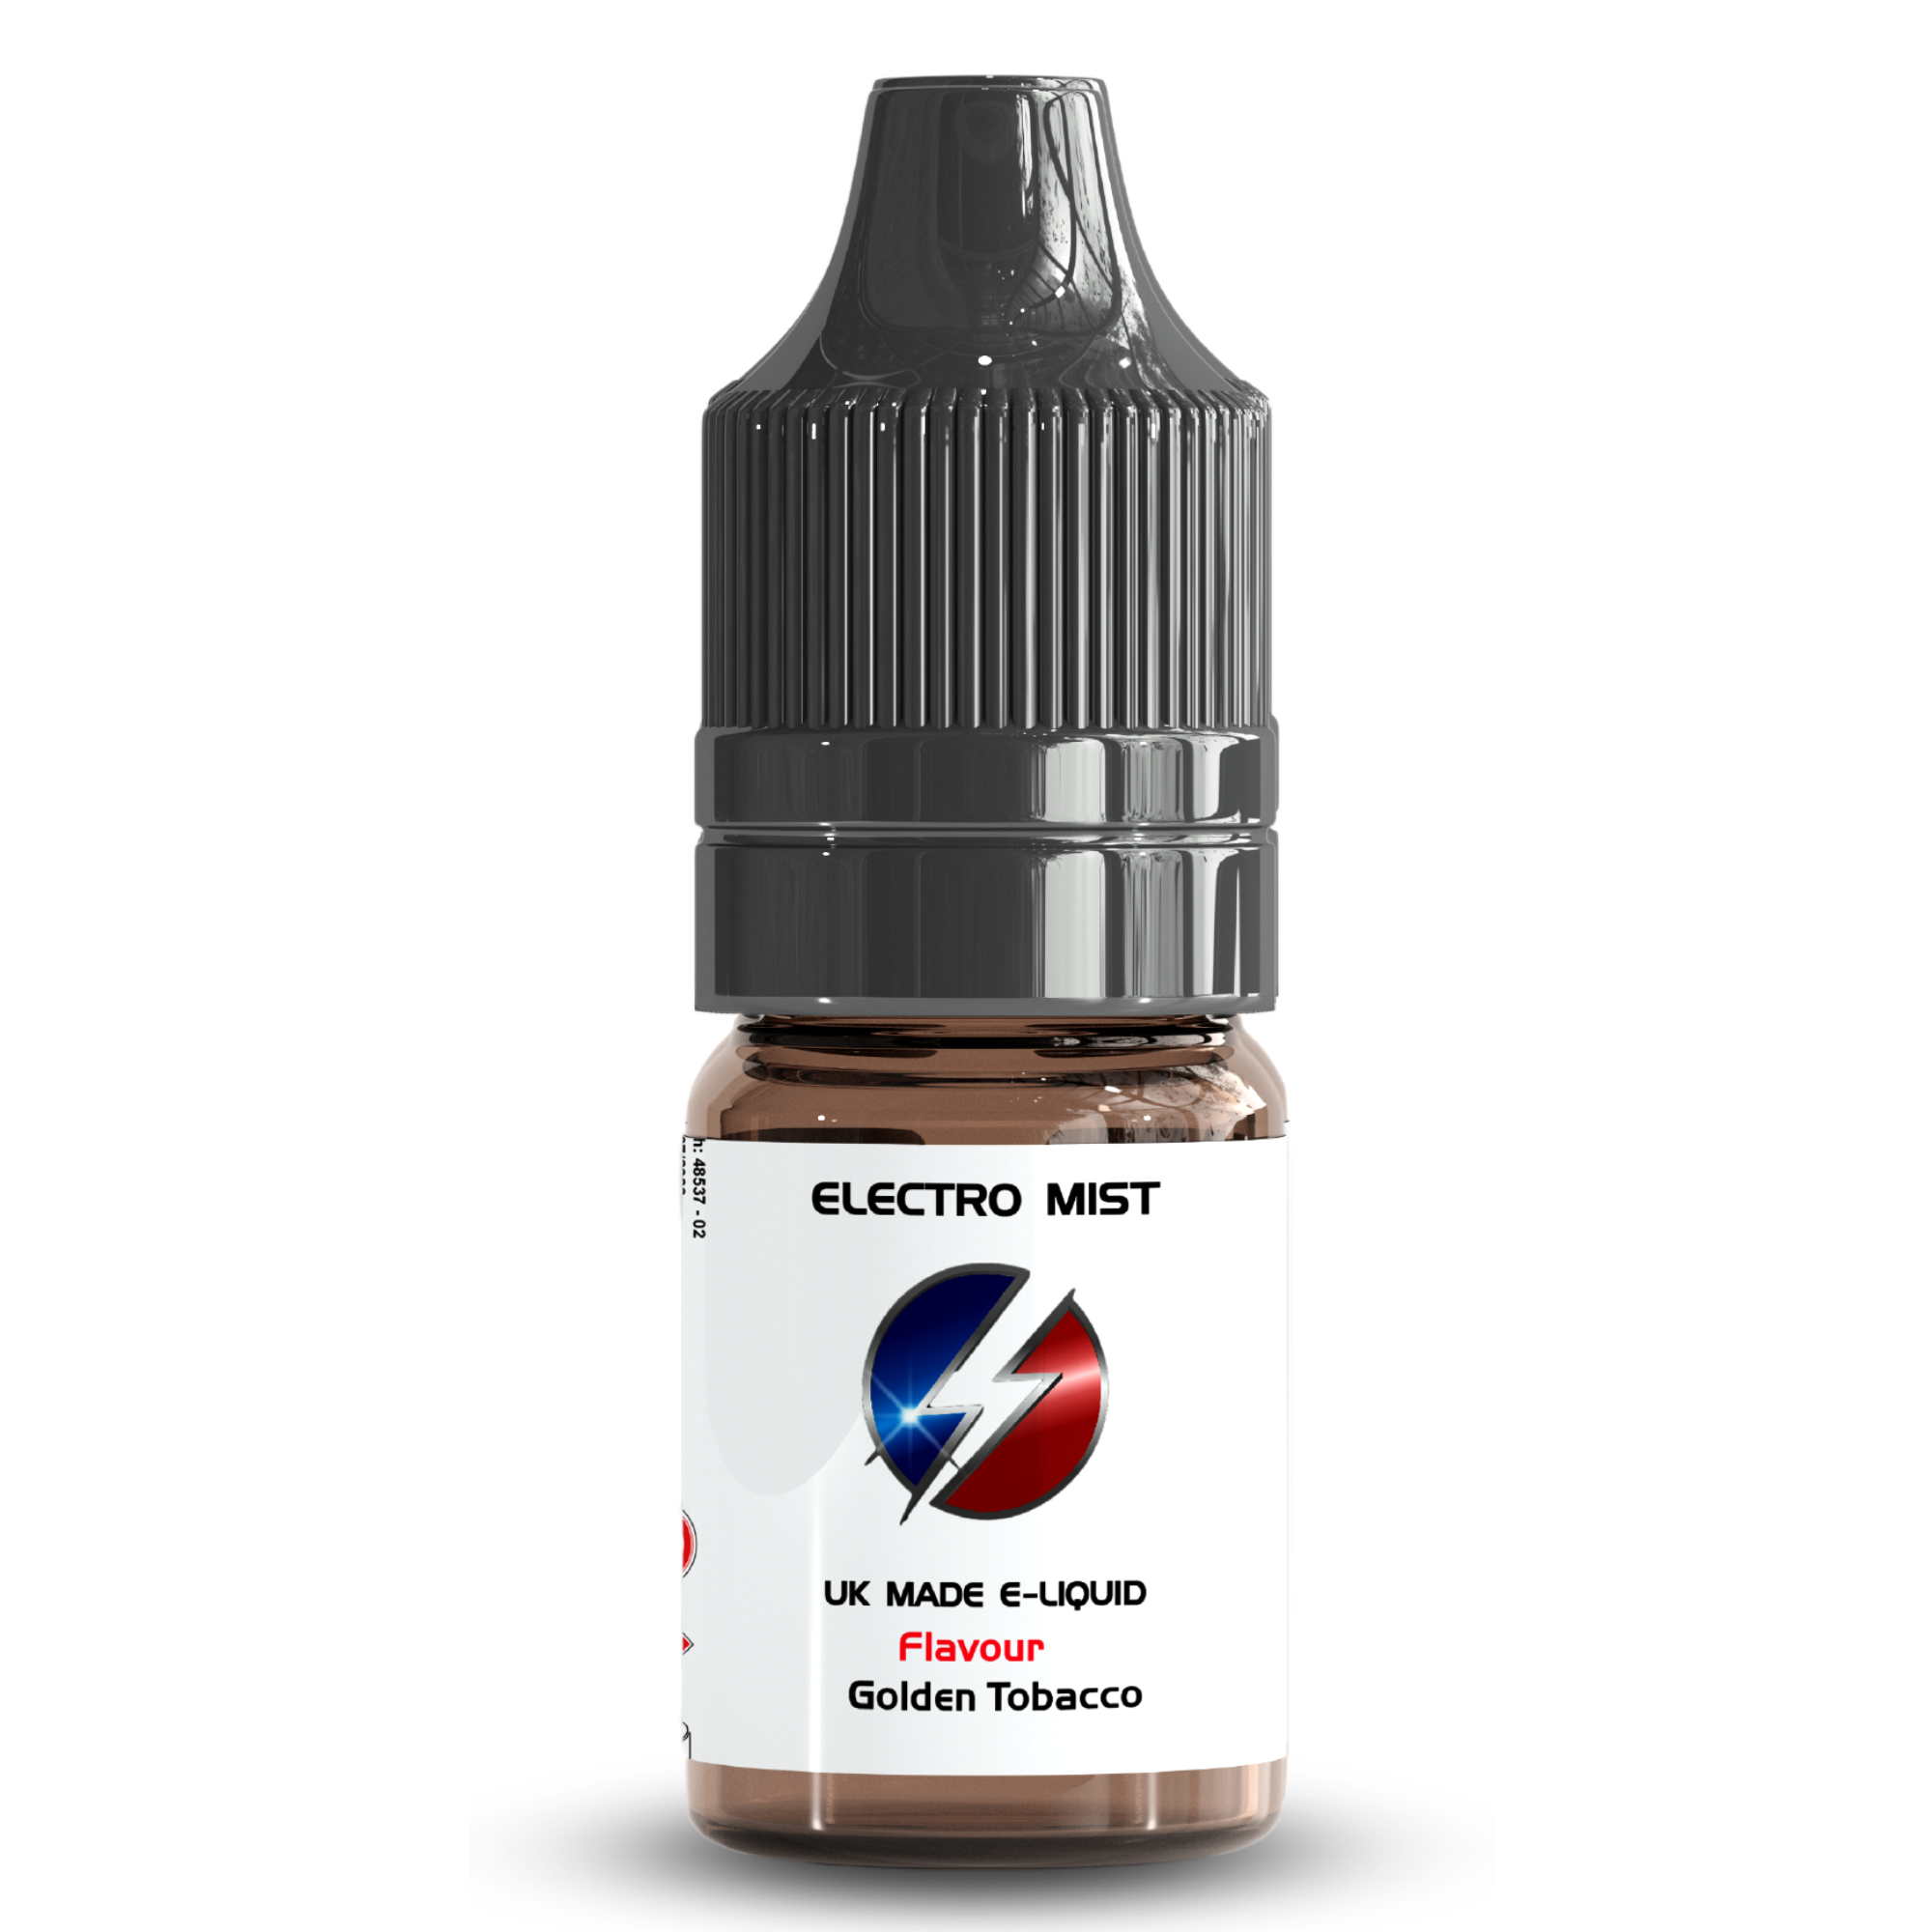 Electromist, the e-liquid brand you can trust. Get your taste buds ready for a flavour sensation, Golden Tobacco. Nicotine Content: 3mg/6mg/12mg. Products may contain nicotine. For over 18s Only ejuice, vape pen, eliquid, e cigarette, 10ml, vaping, cloud, PG, VG, 60/40, vape liquid, Flavour